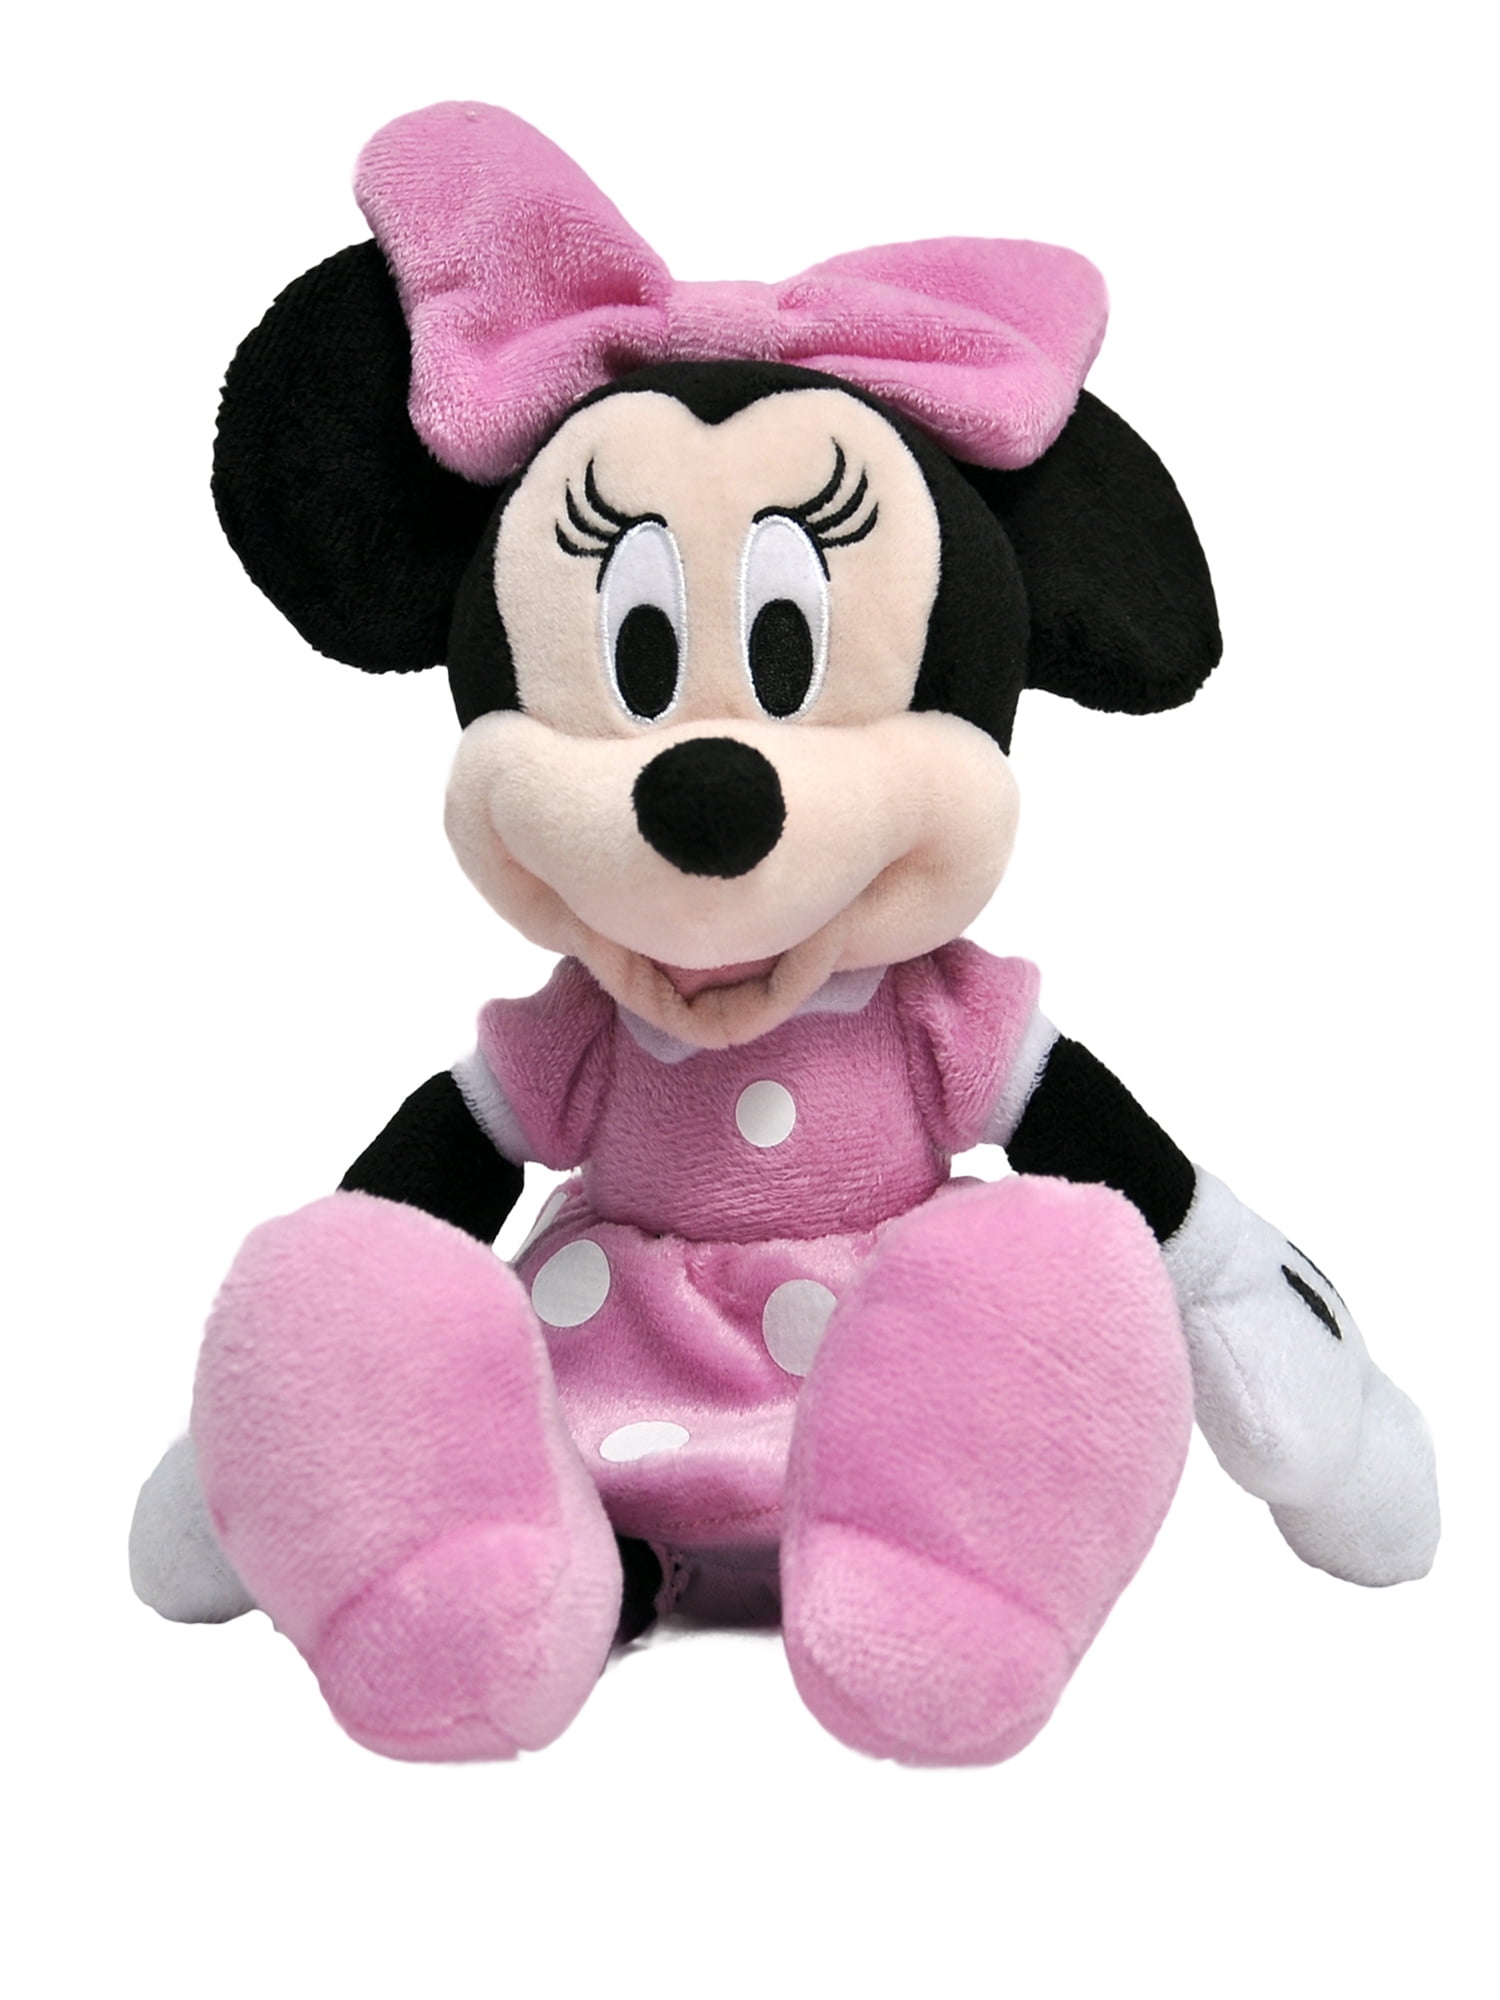 Minnie Mouse Plush Doll 11 Inches Pink - Walmart.com